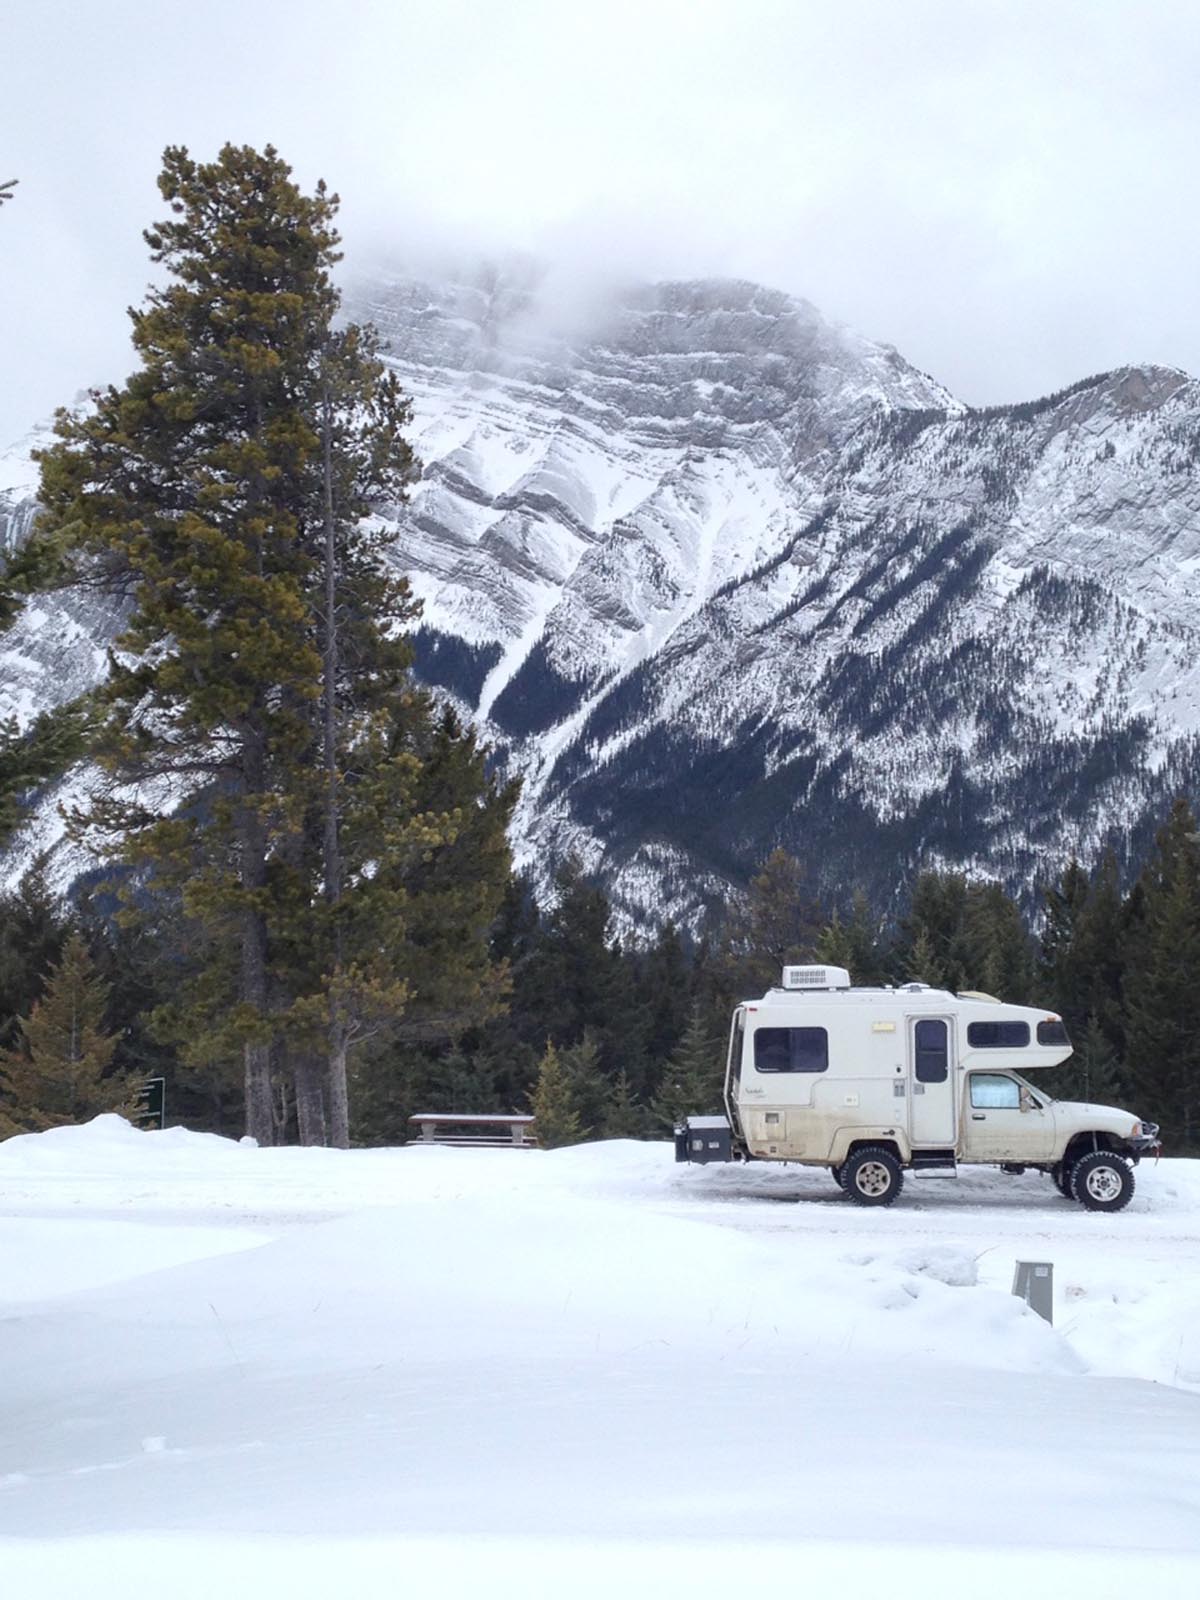 #Vanlife: Kurt Gensheimer shows us his epic Toyota Sunrader & 4WD conversion in the snow